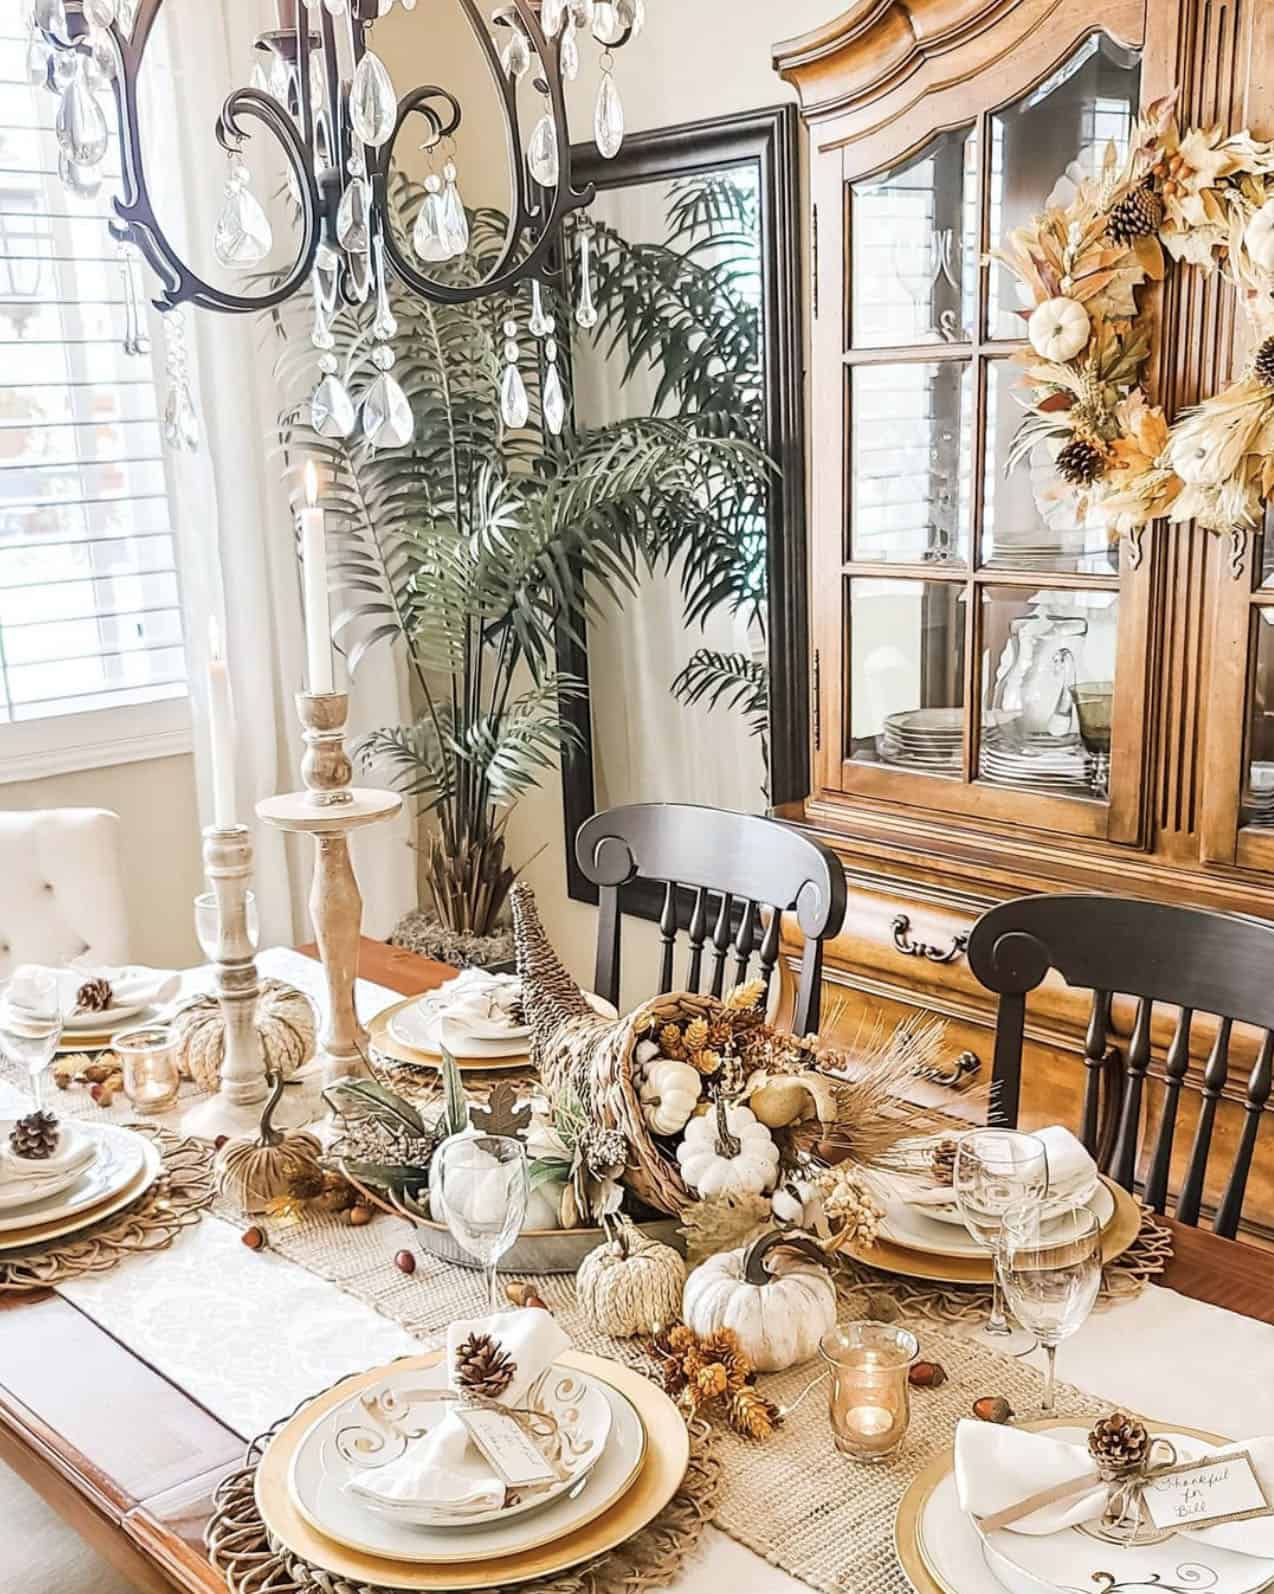 cornucopia-centerpiece-for-thanksgiving-decorated-dining-table